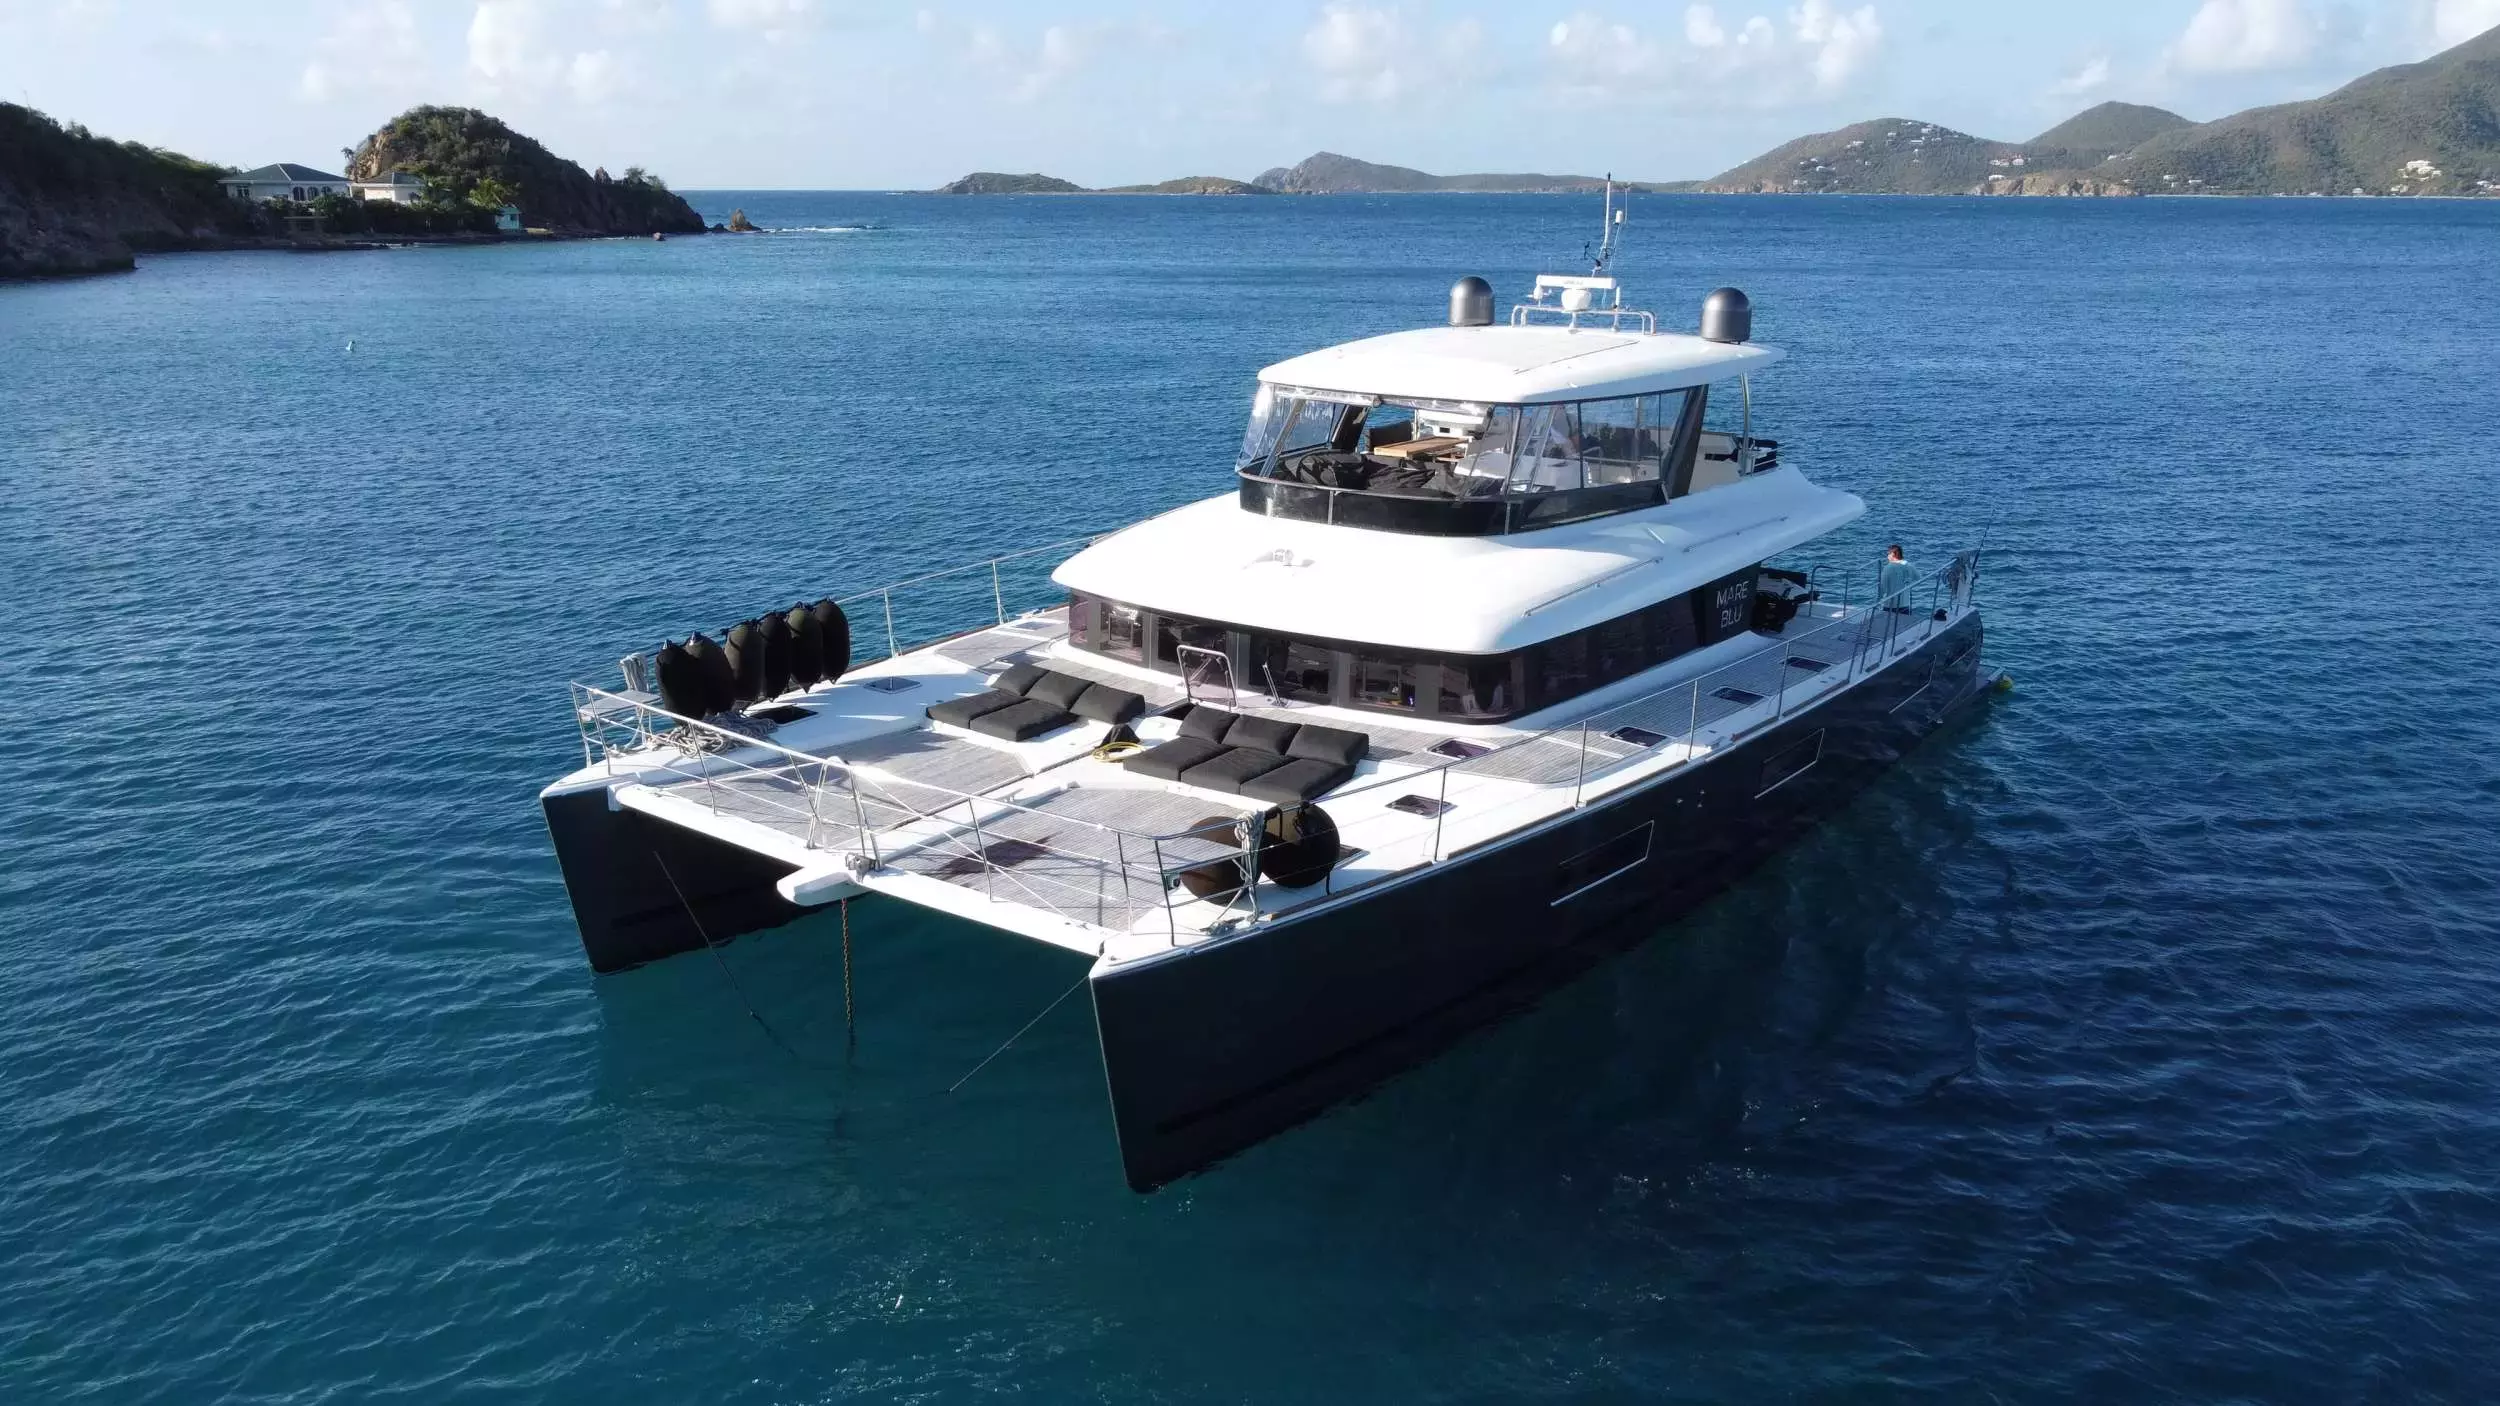 Mare Blu by Lagoon - Top rates for a Charter of a private Power Catamaran in British Virgin Islands